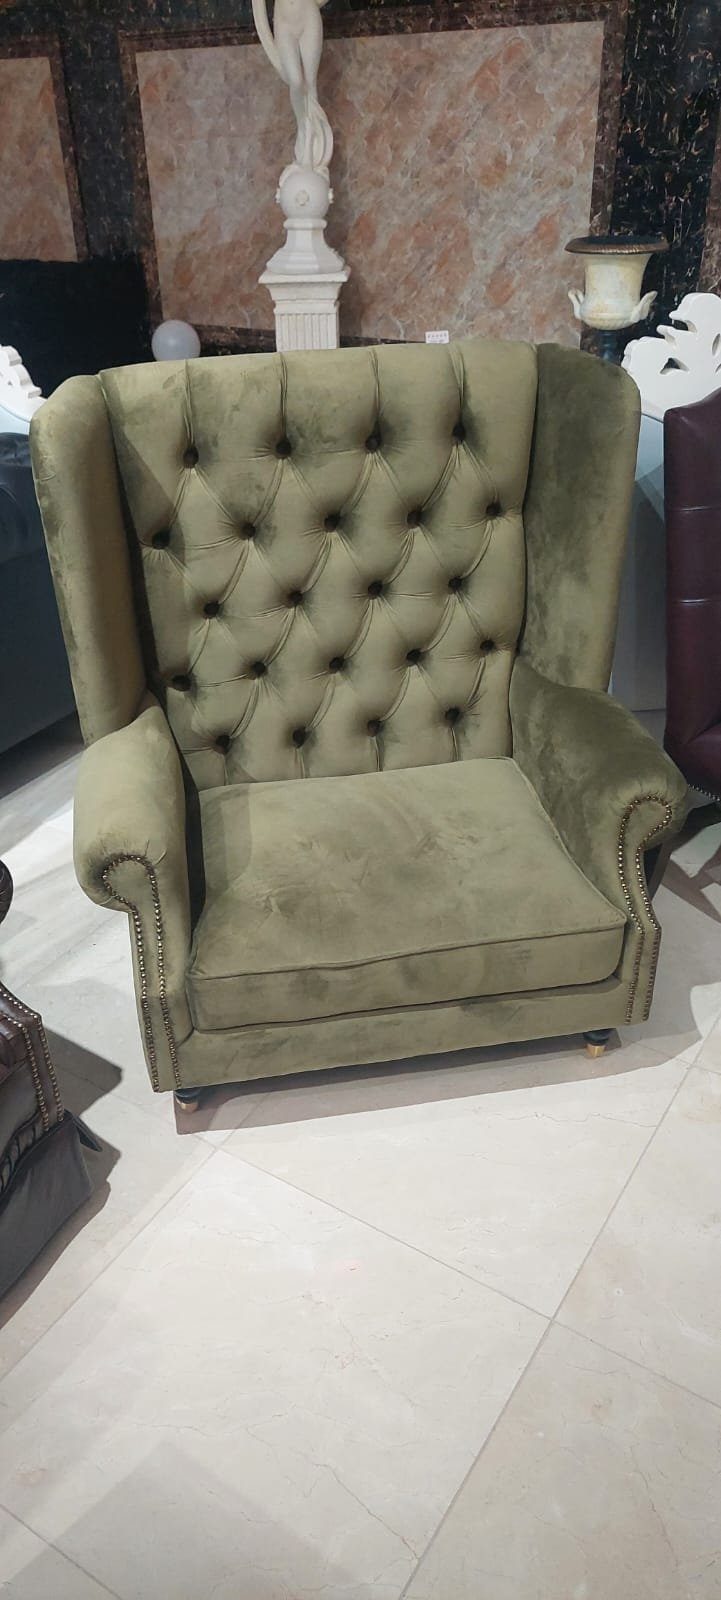 Sofort, 1 JVmoebel Couch Chesterfield Design Stoff in Chesterfield-Sessel Europa Polster Sessel Made Sitzer